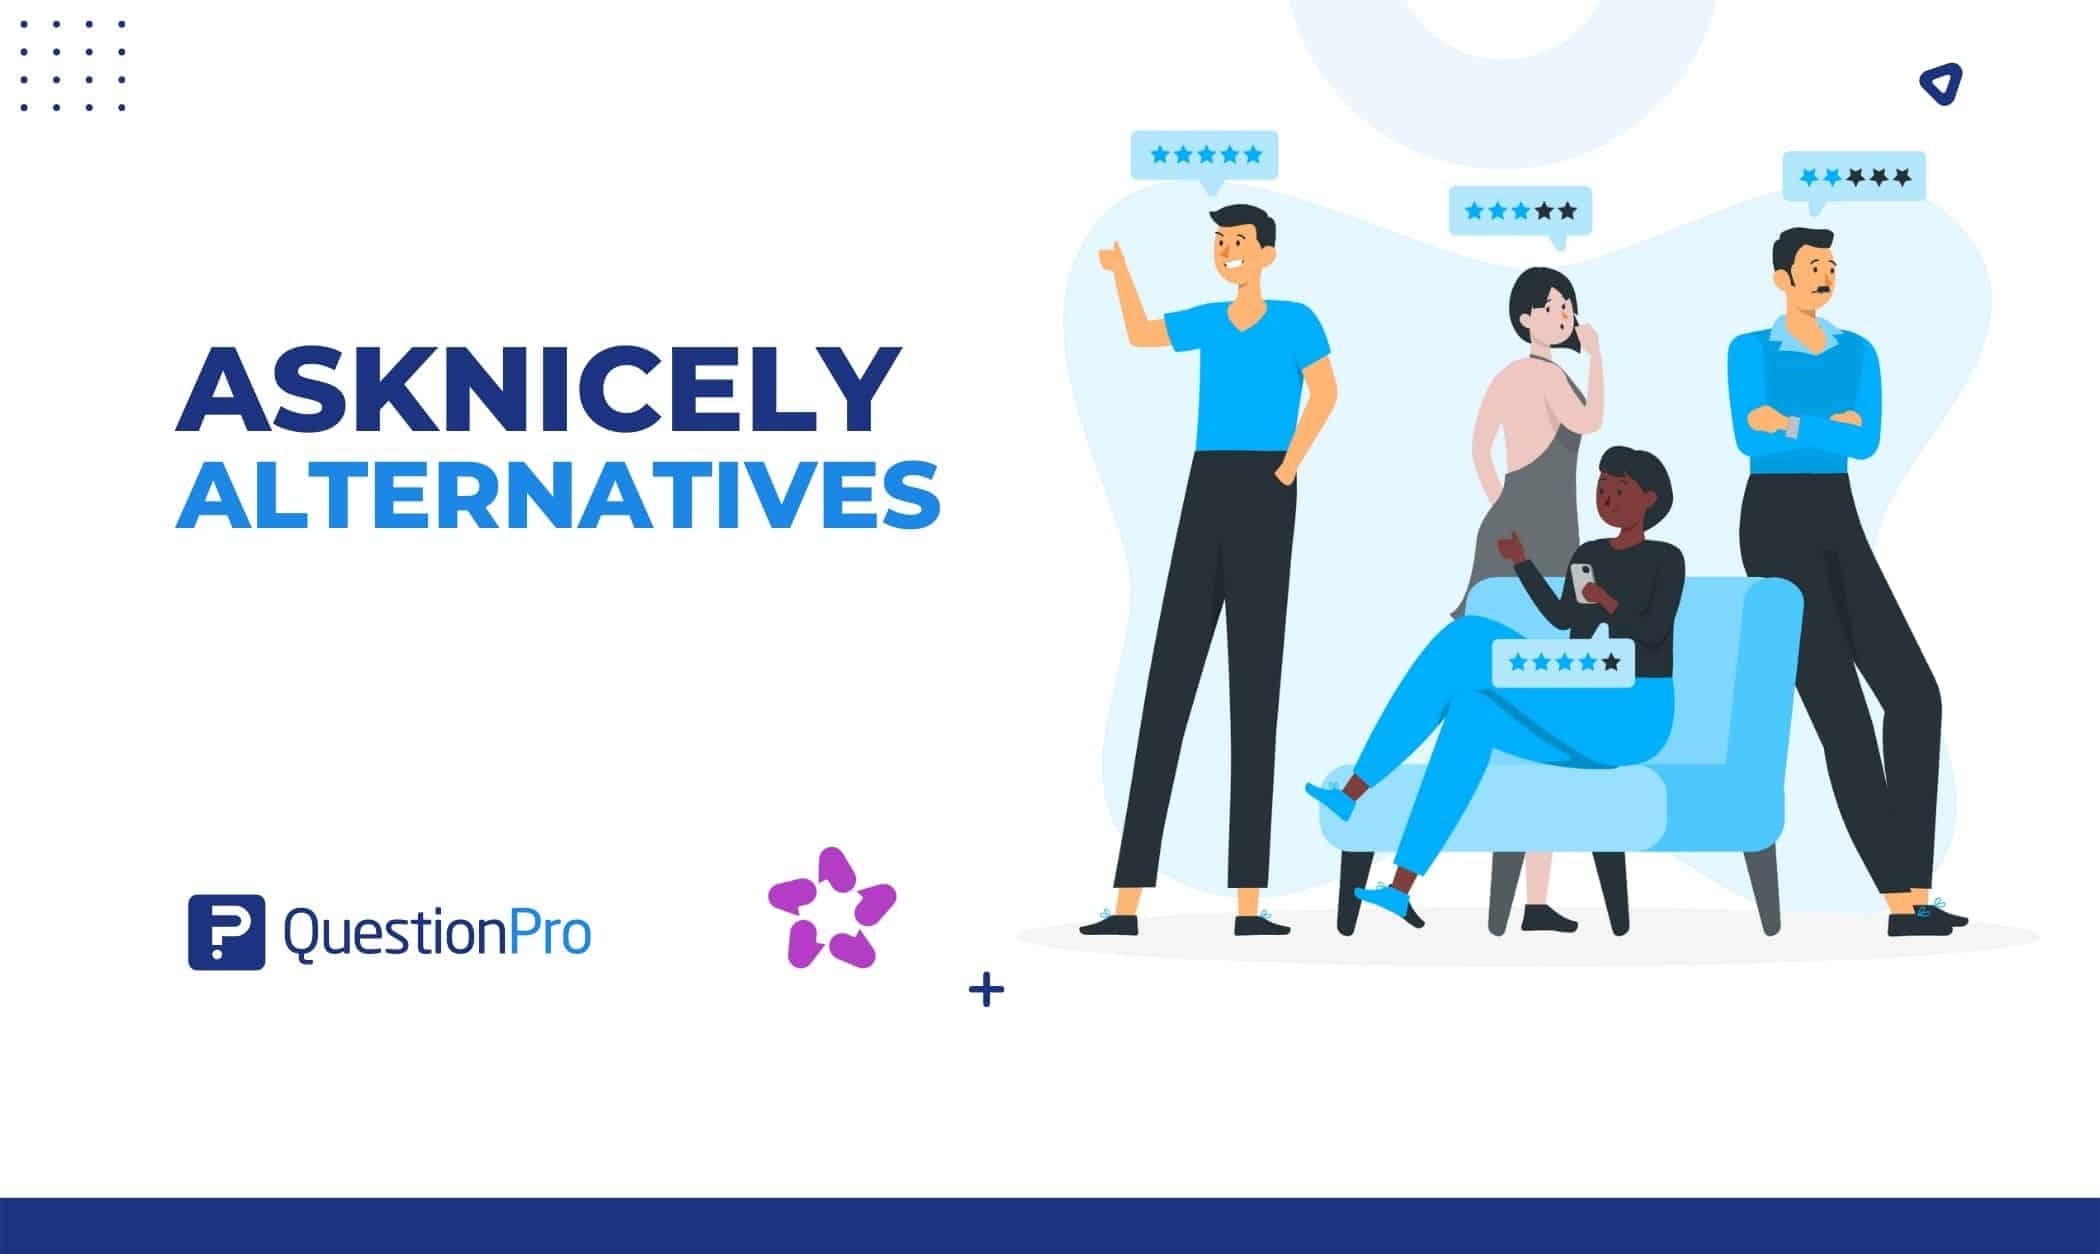 Let's find out some drawbacks of AskNicely that will make it easy to find AskNicely alternatives. In this article we give you the best ones.